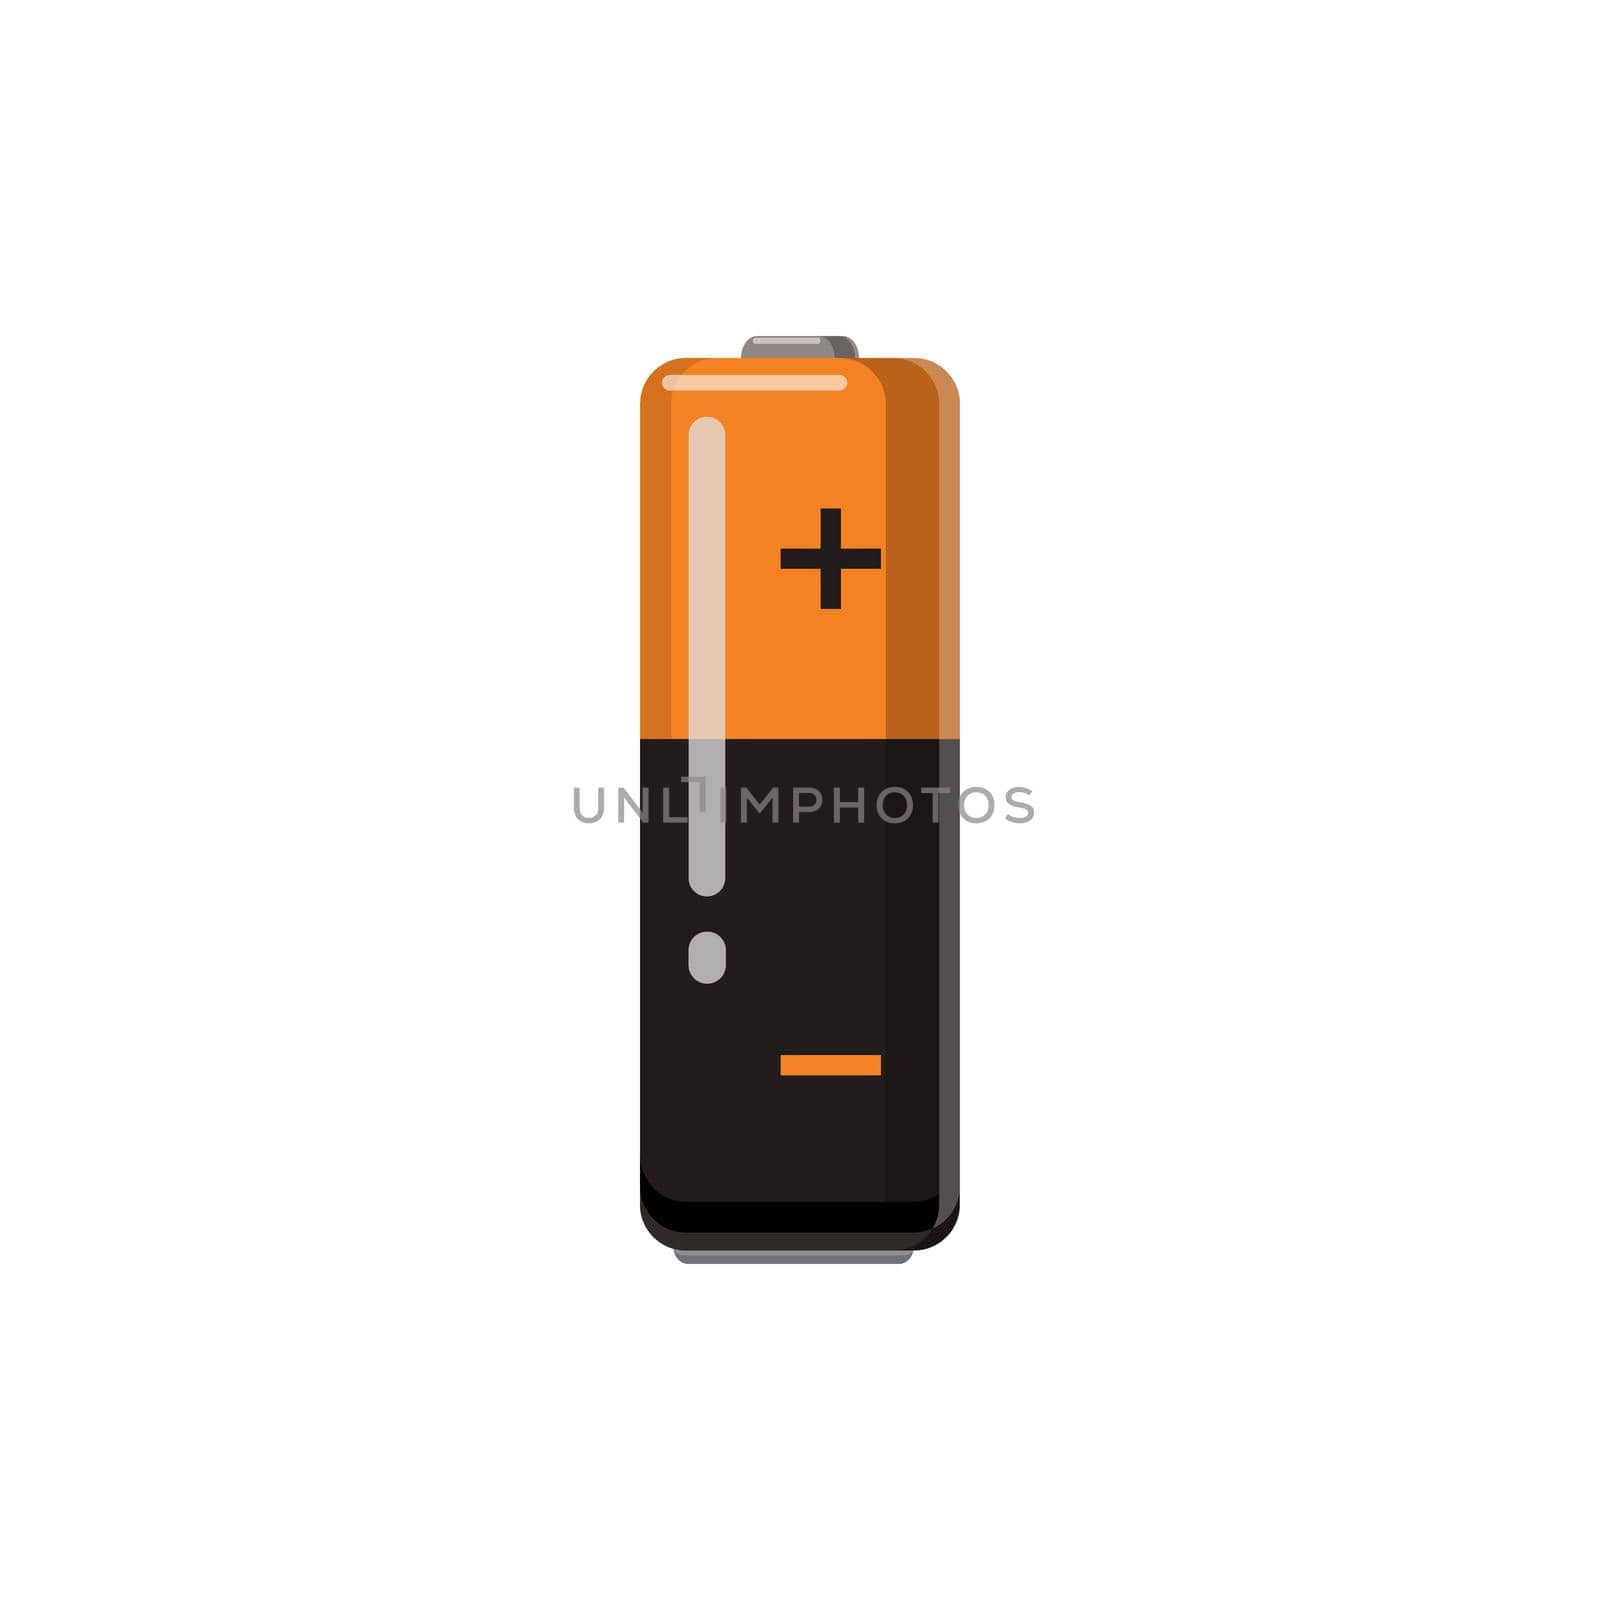 Battery icon in cartoon style on a white background